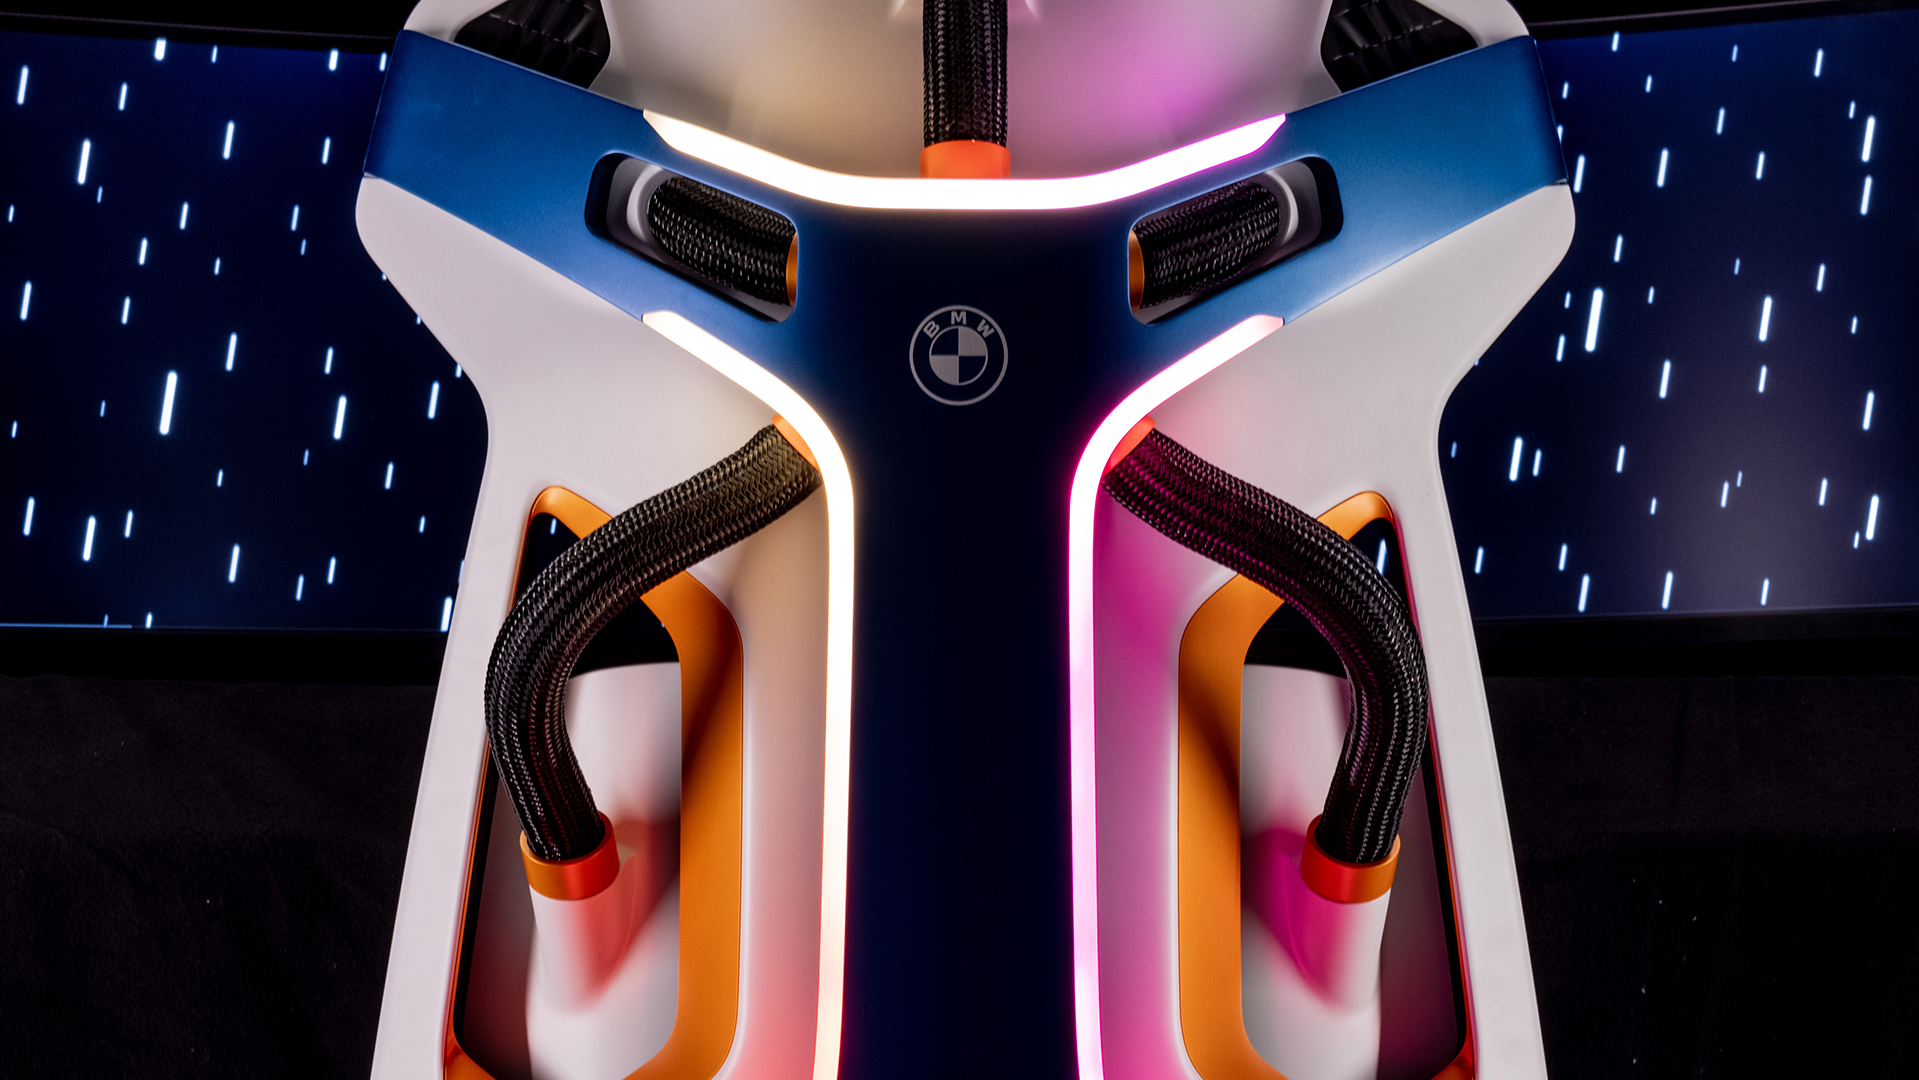 BMW Rivalworks The Rival Rig gaming chair concept from various angles on black background